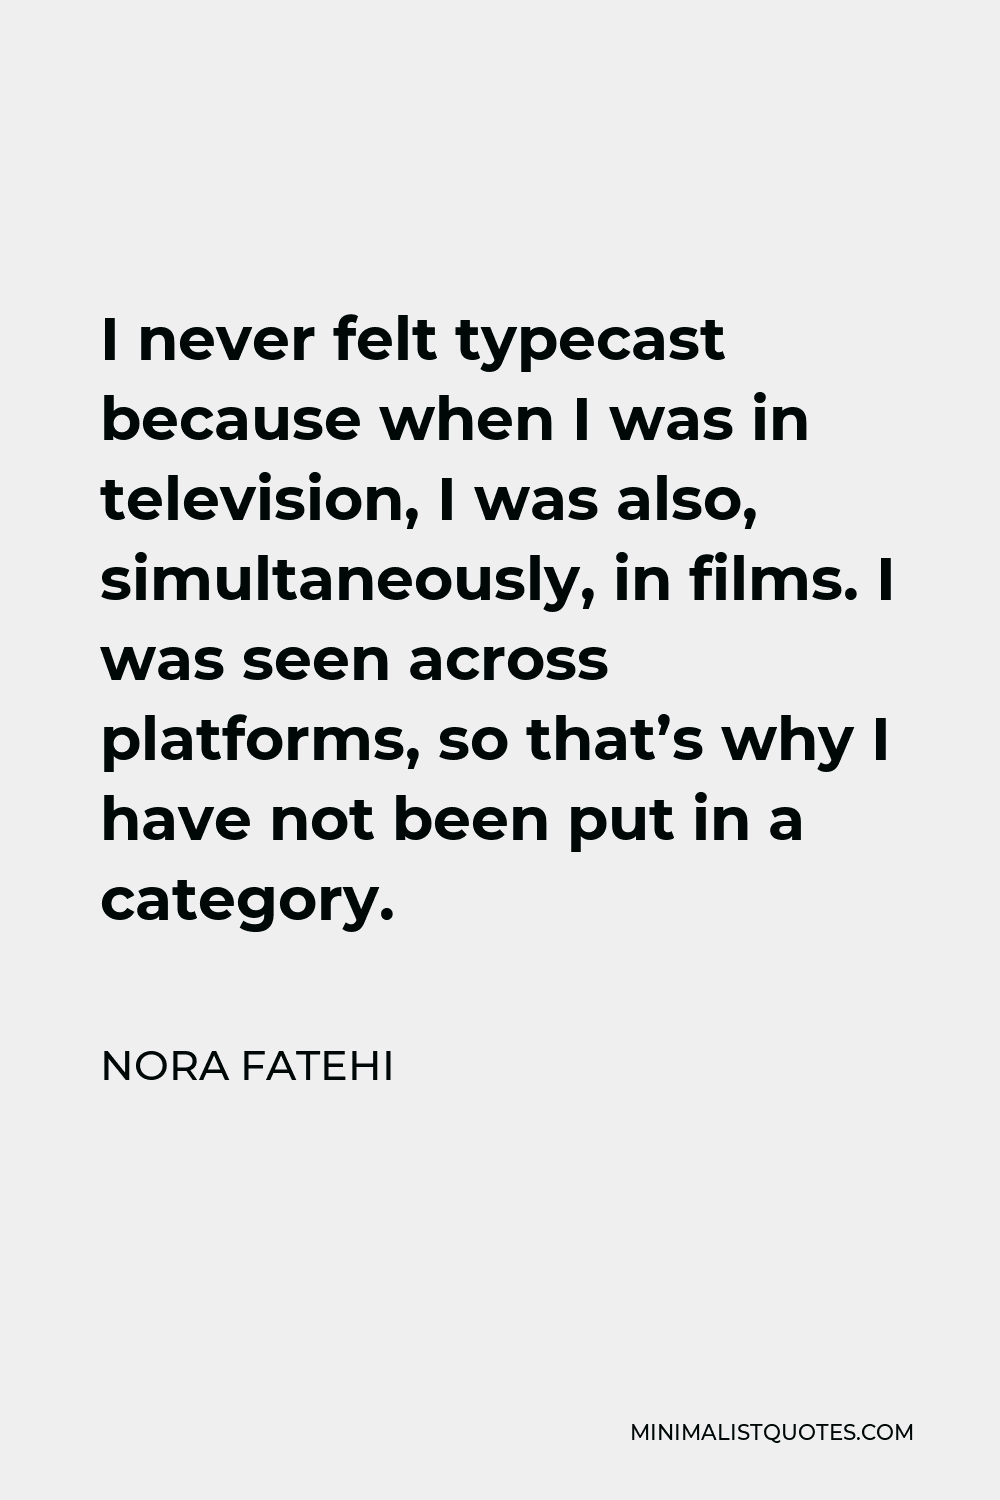 Nora Fatehi Quote - I never felt typecast because when I was in television, I was also, simultaneously, in films. I was seen across platforms, so that’s why I have not been put in a category.